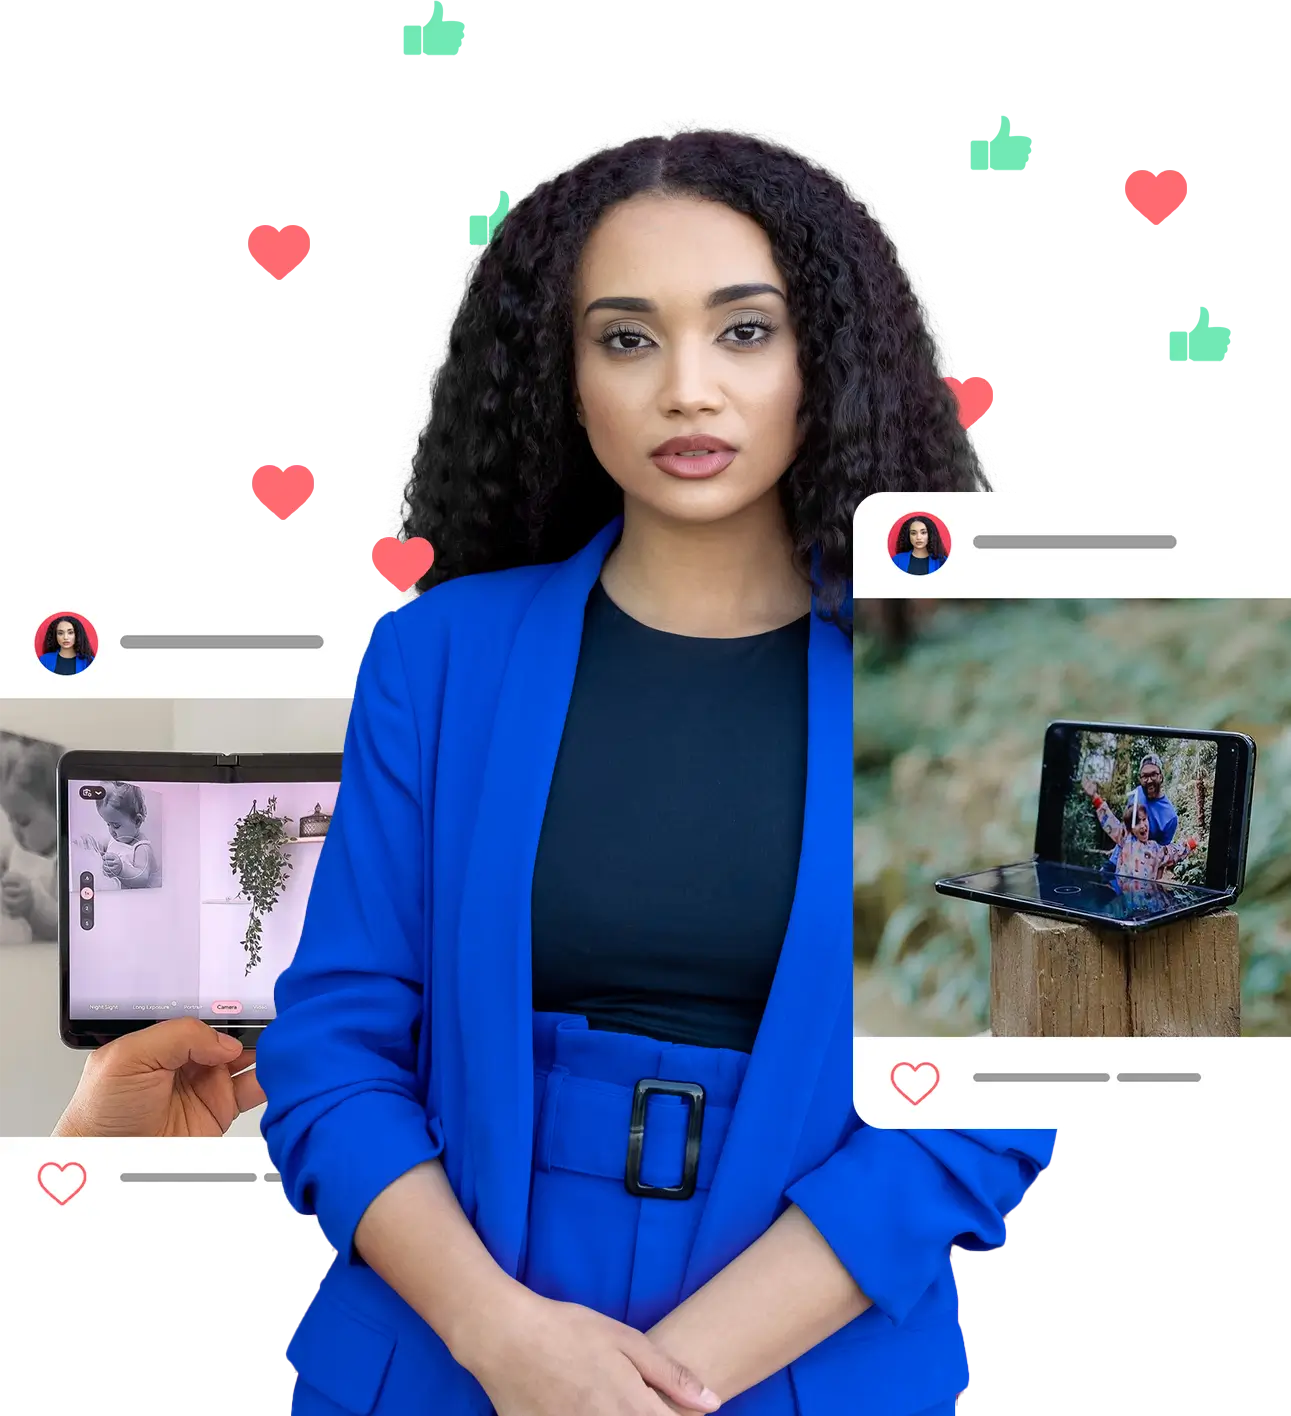 A woman dressed in blue is surrounded by graphic elements showing devices connected to social networks with likes and hearts around her. Representing the power of a Social Buzz Campaign